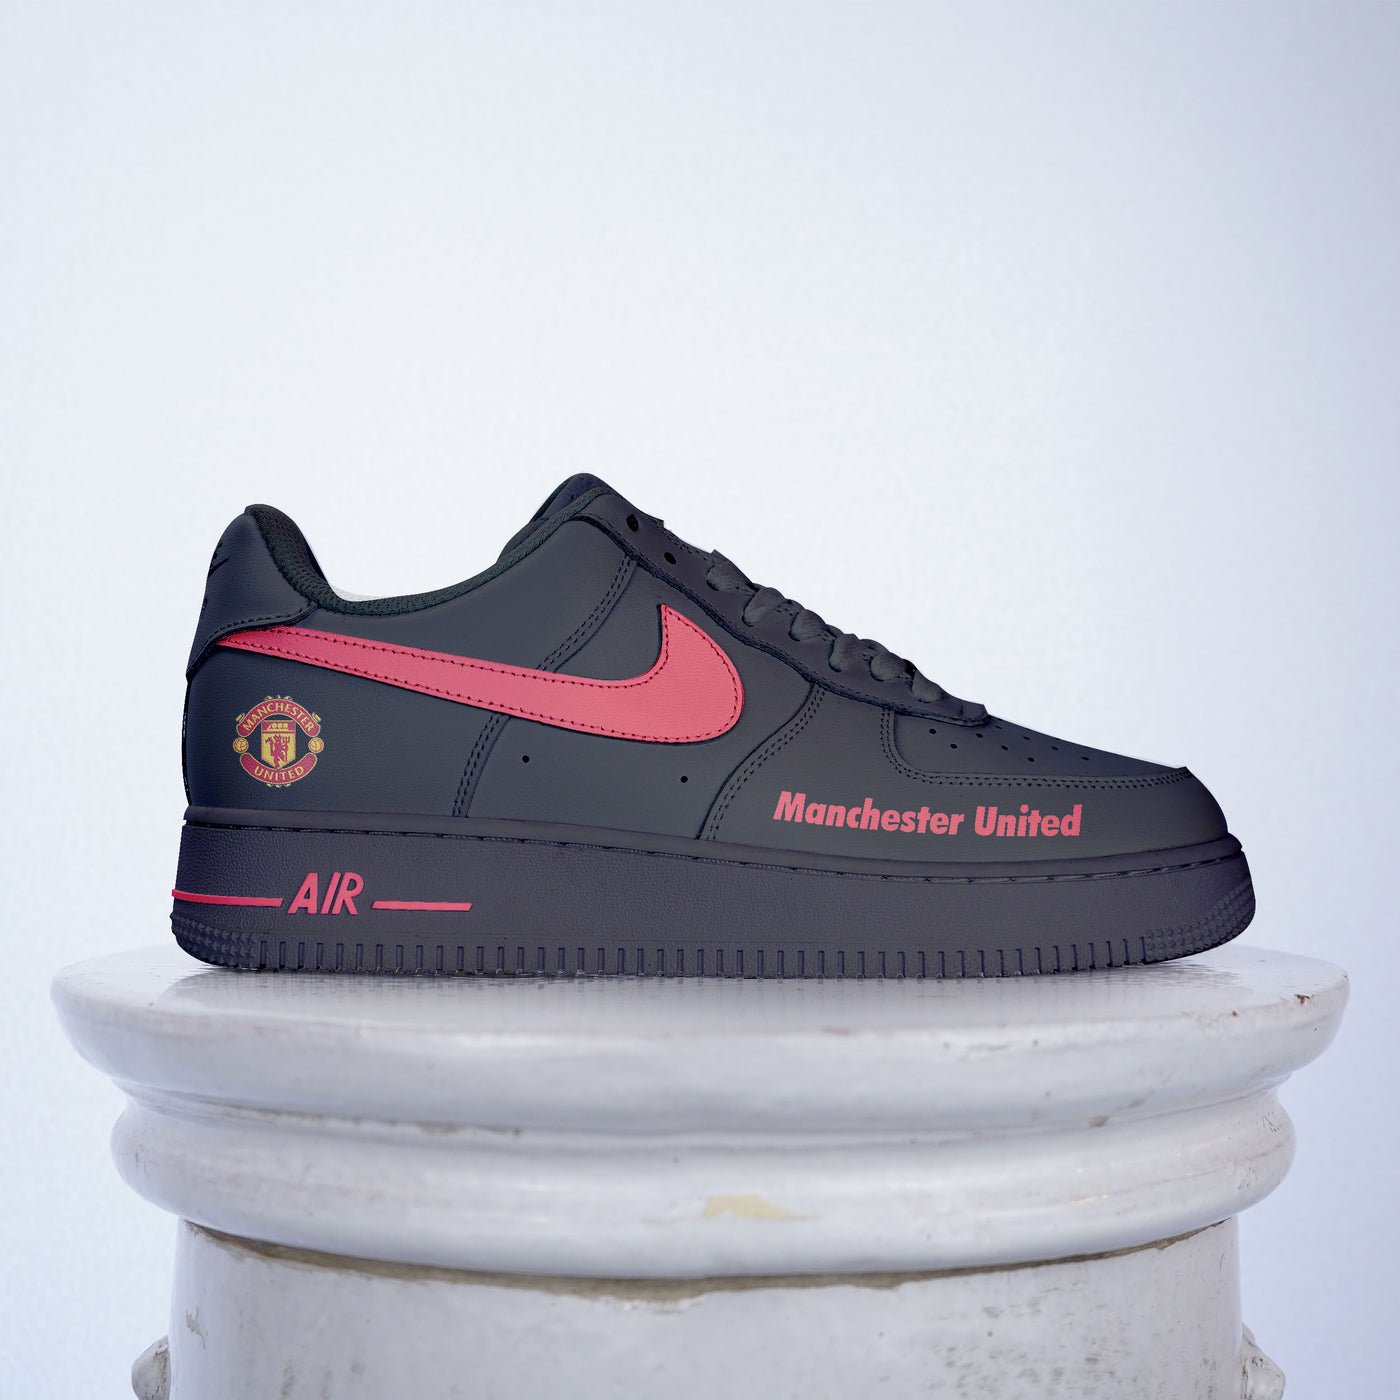 Manchester United sneakers